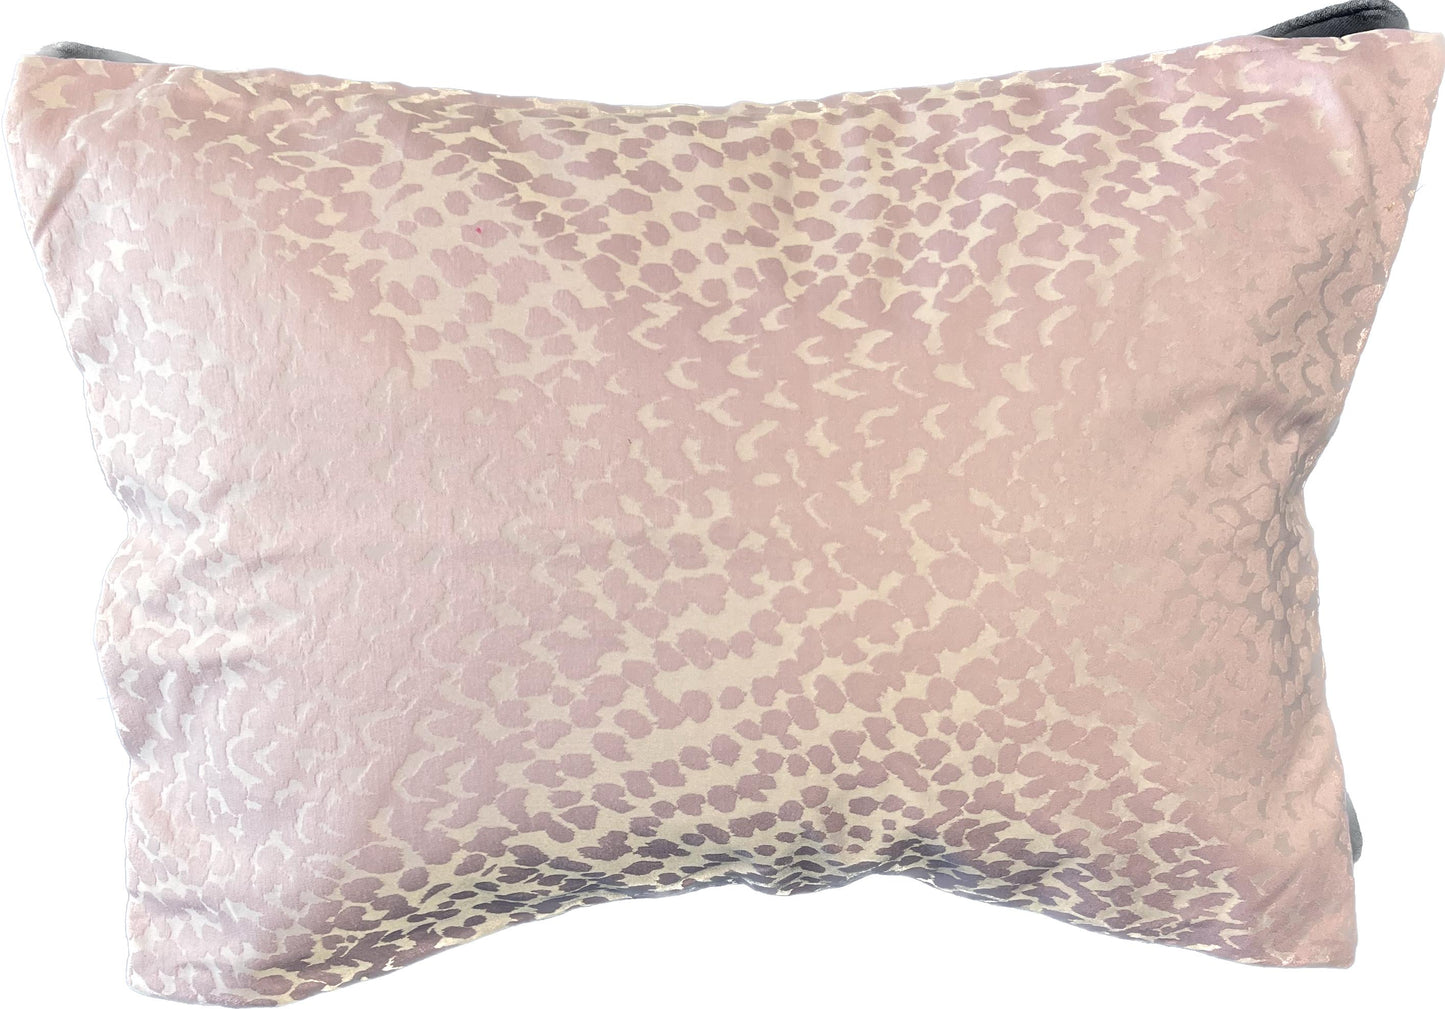 12"x18"  Purple Pillow Cover*** Special Price***